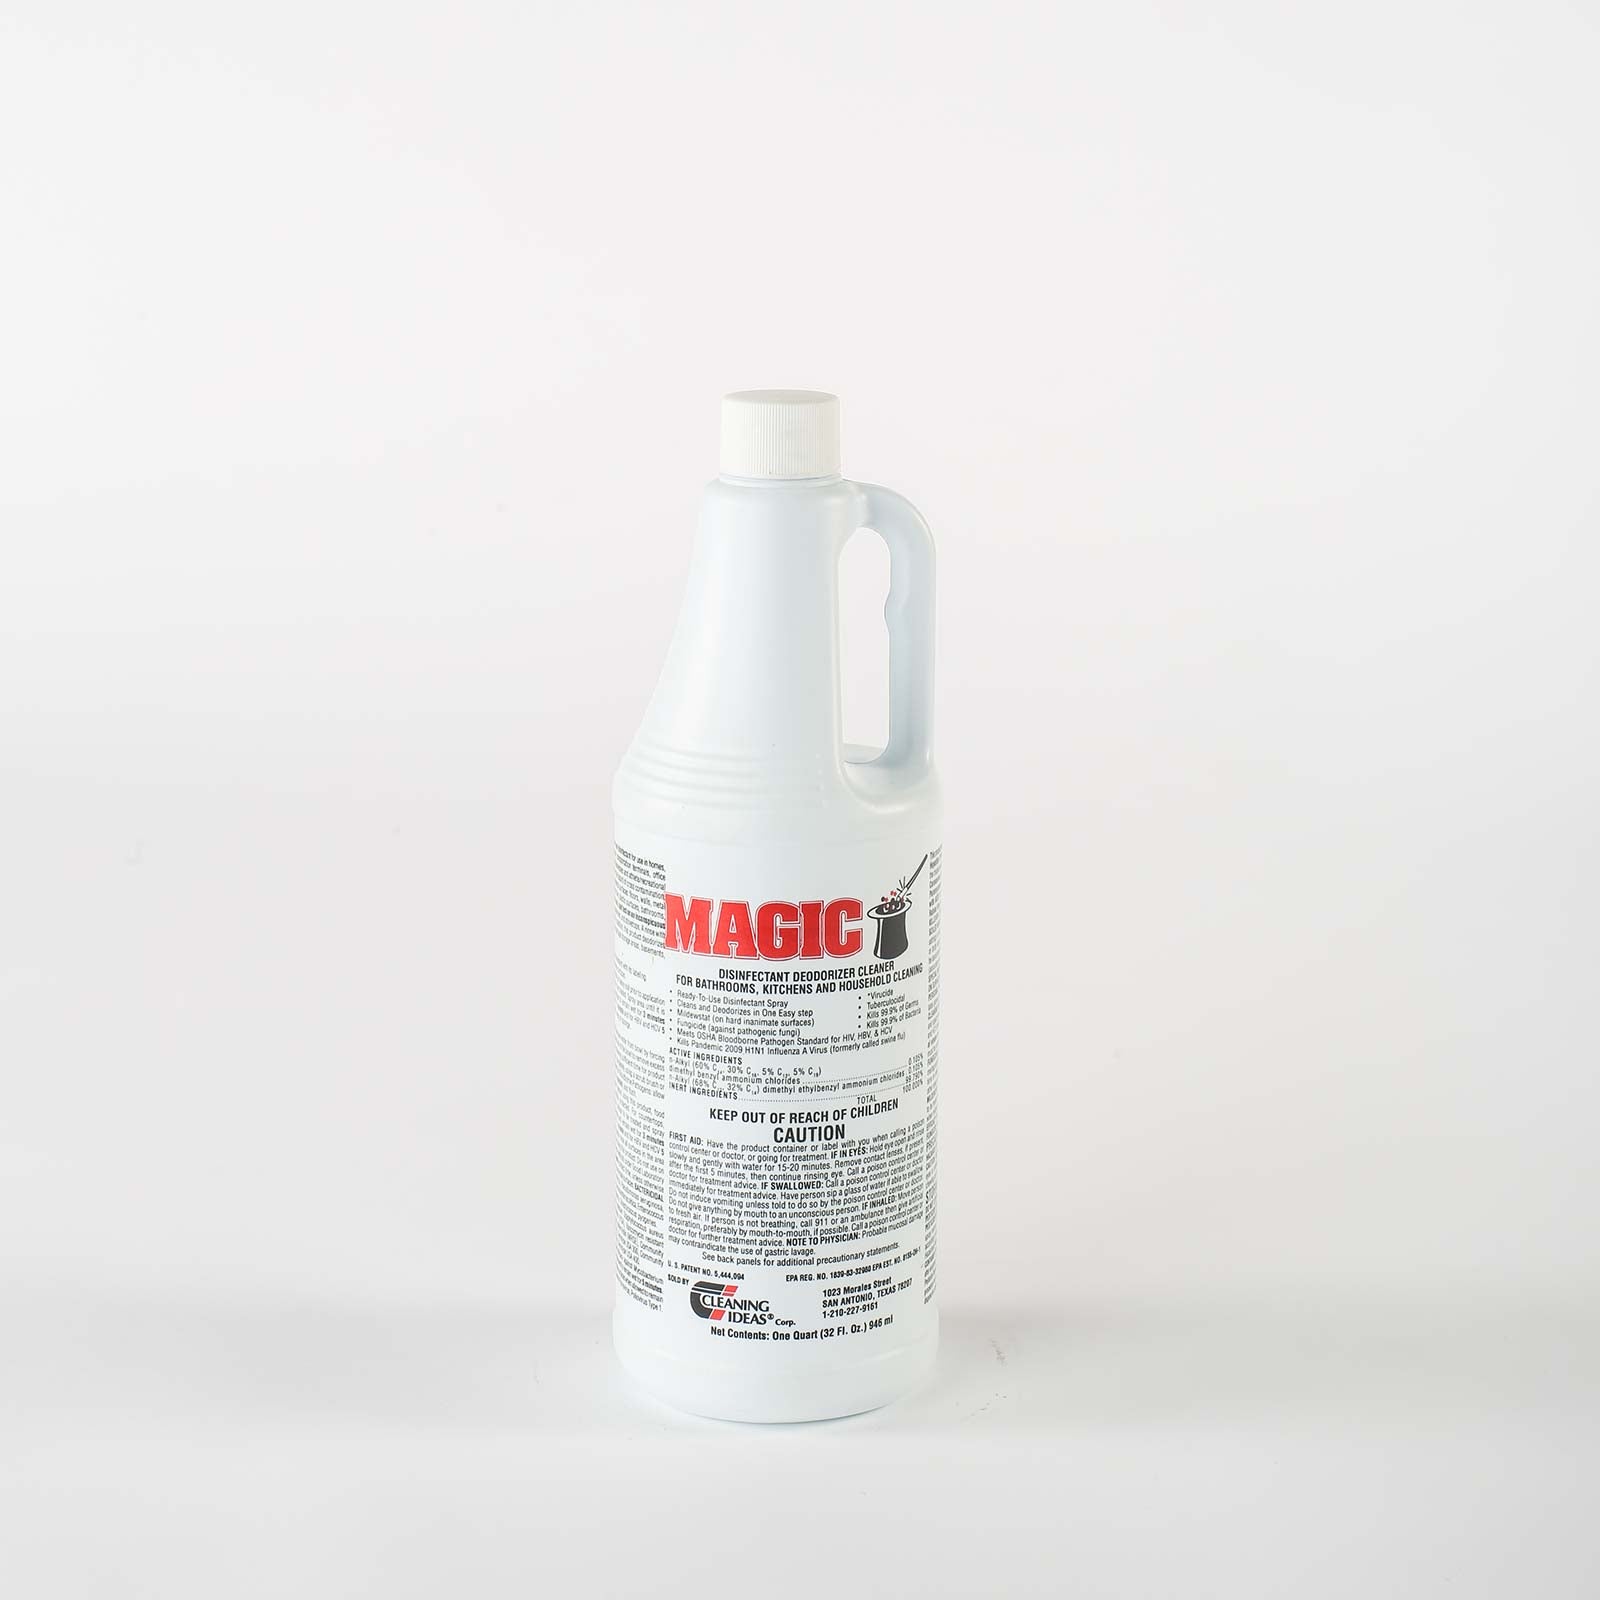 MAGIC DISINFECTANT DEODORIZER CLEANER FOR BATHROOMS,  KITCHENS, AND HOUSEHOLD CLEANING (only available in texas)